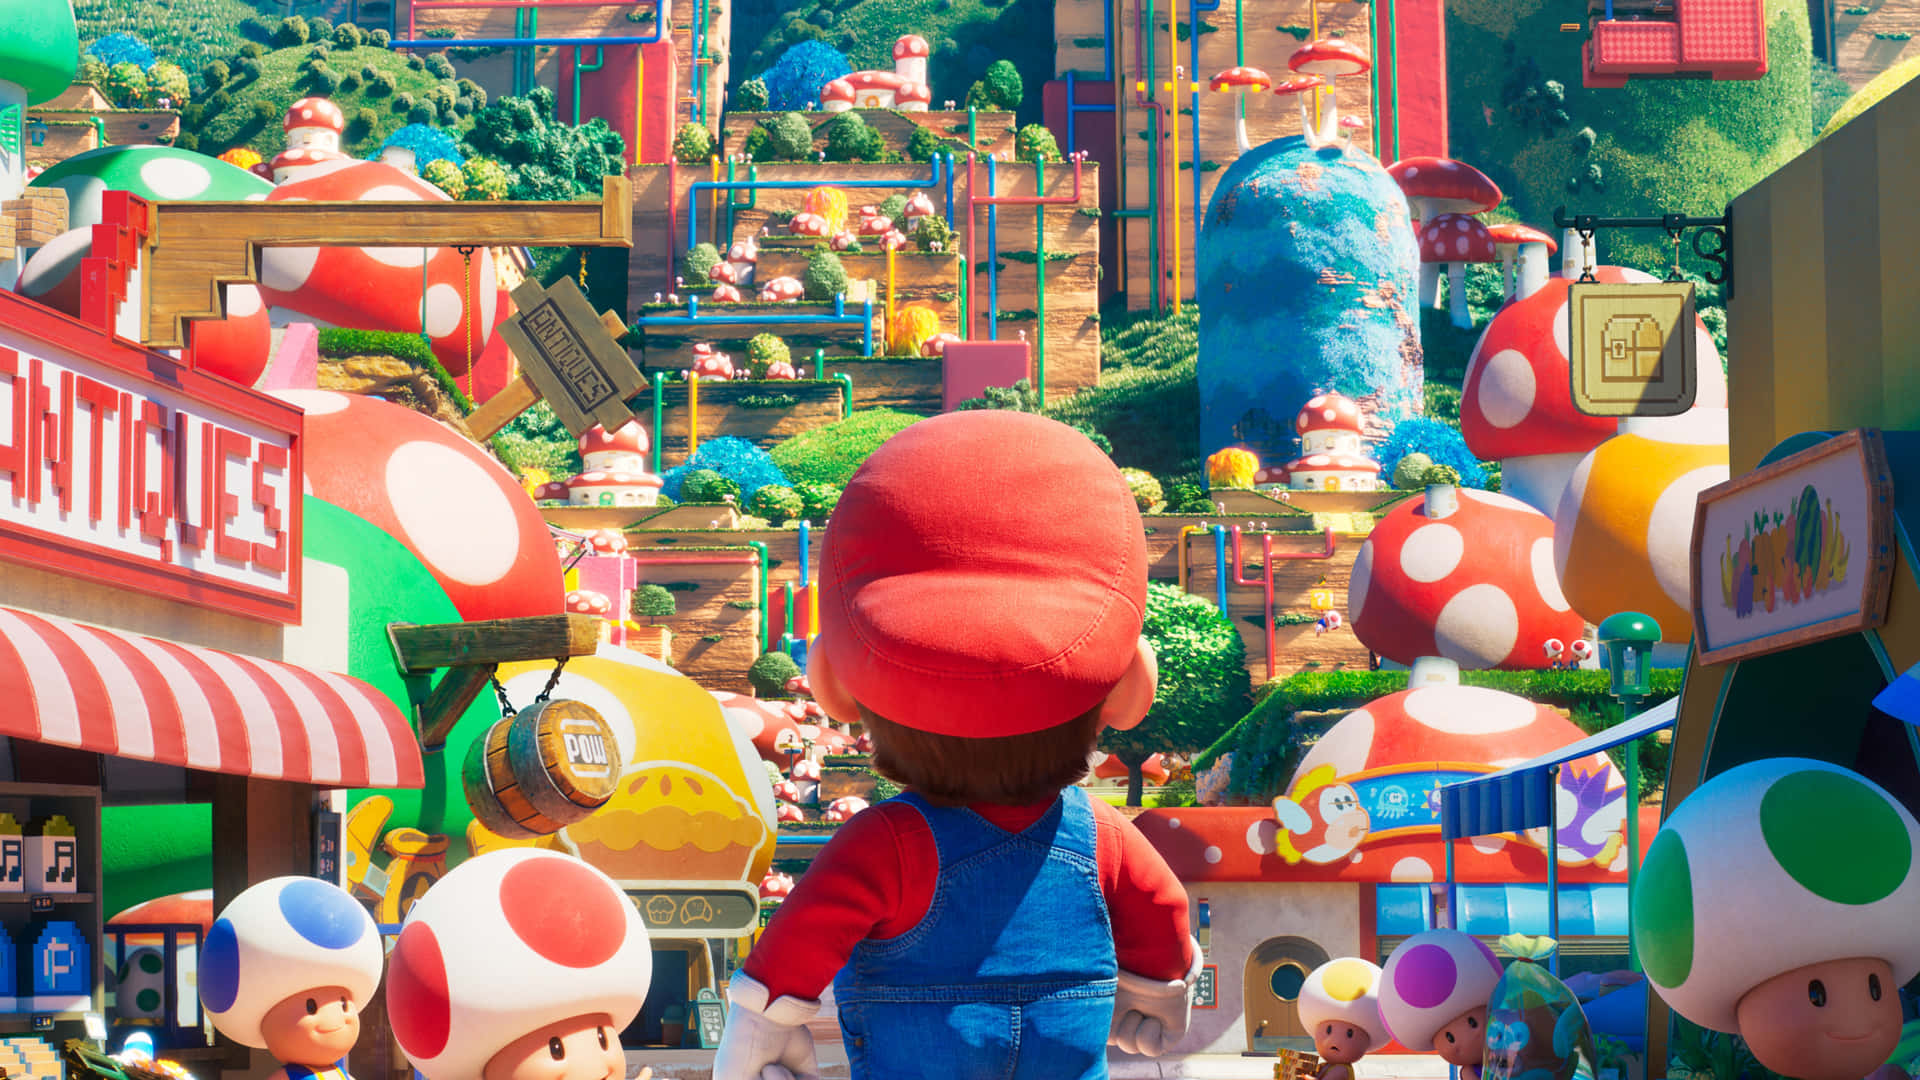 Cool Mario Shows Off His Agility As He Collects Coins In The Mushroom Kingdom